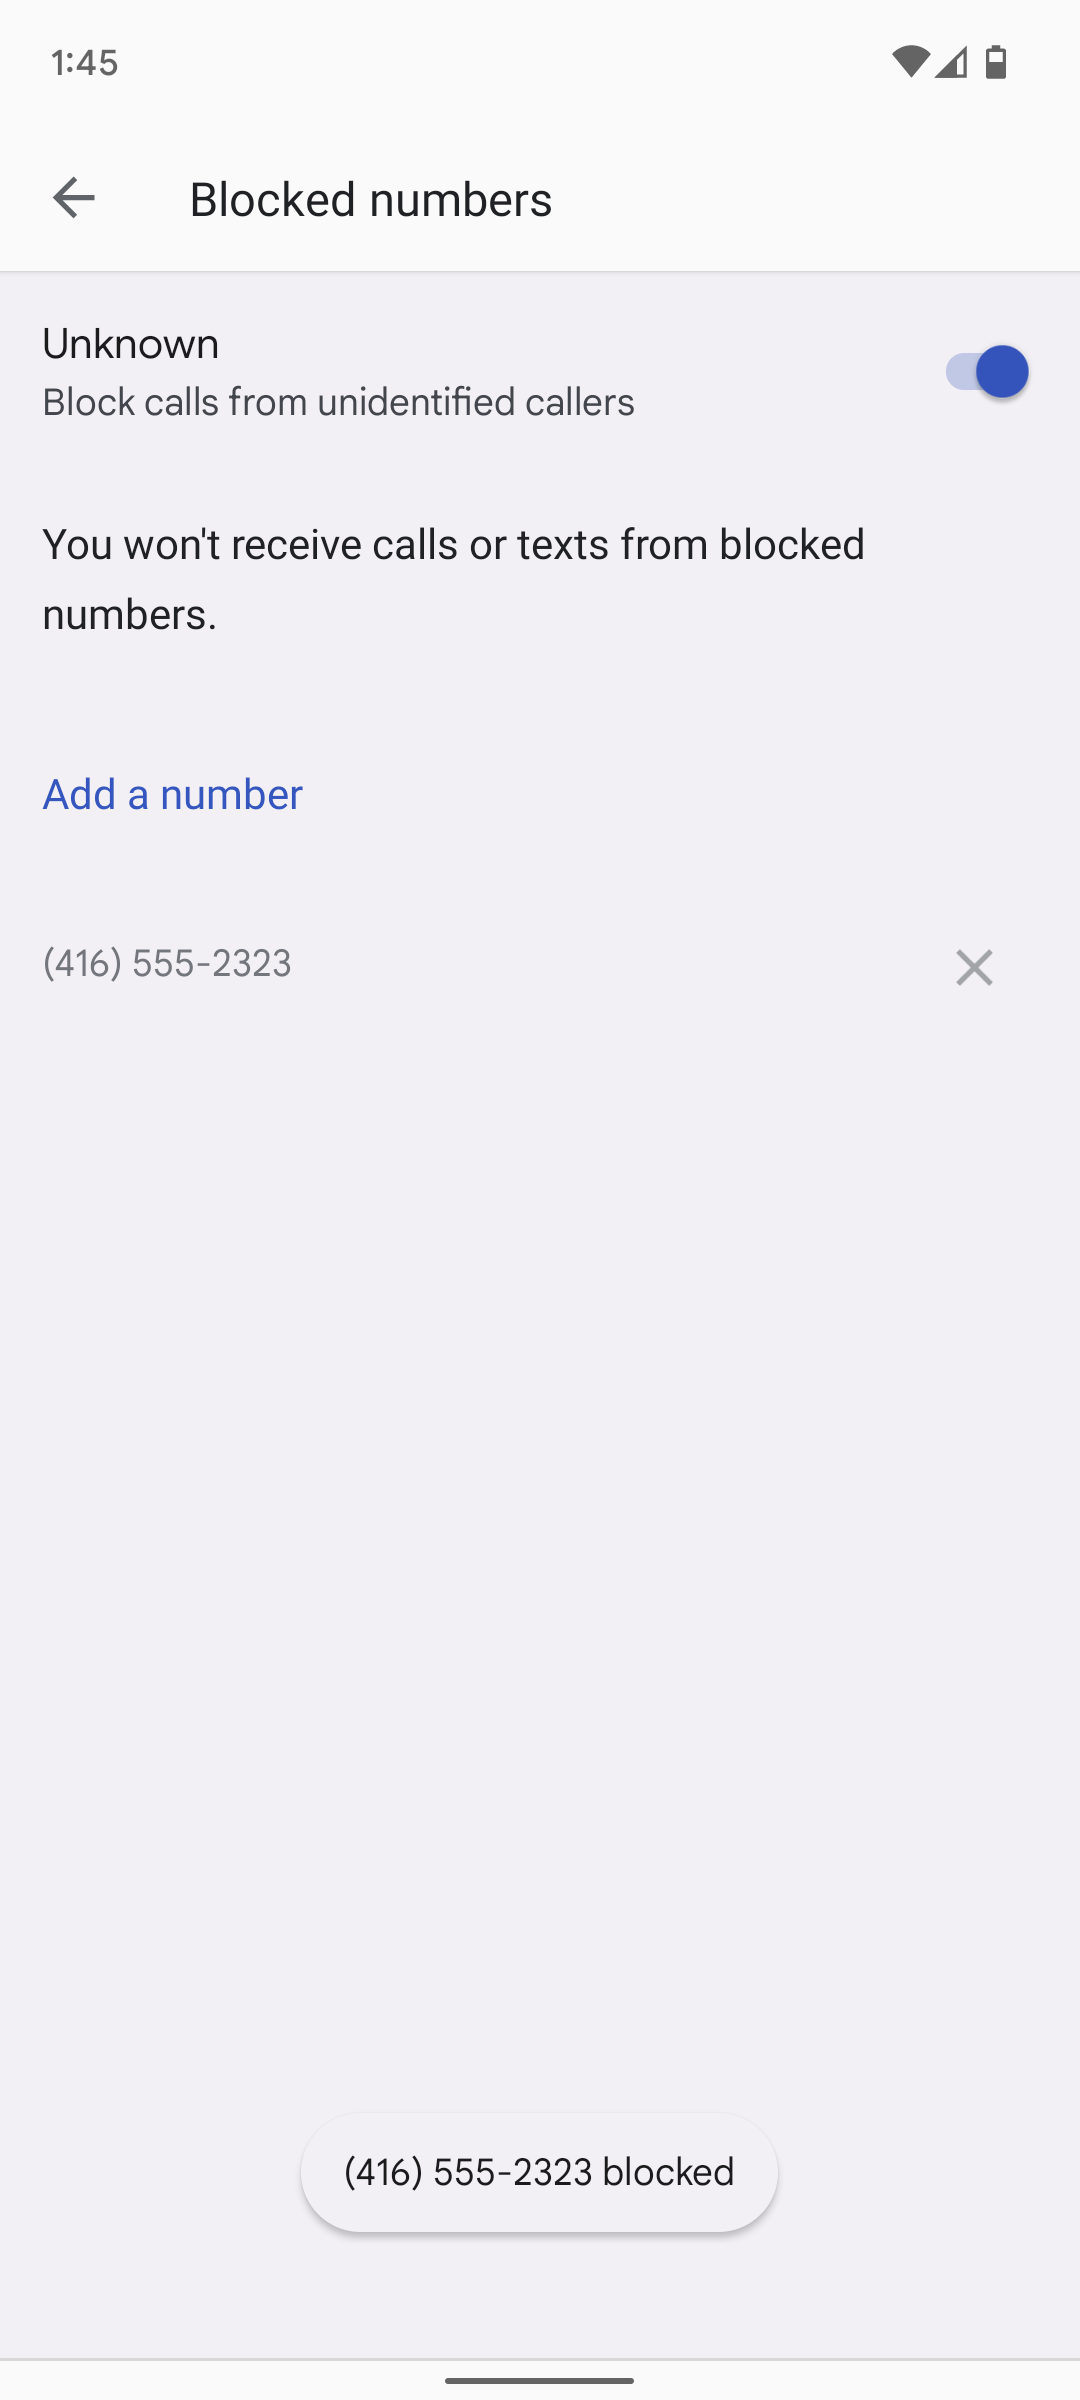 To remove a phone number from the block list: touch the x icon next to the phone number.